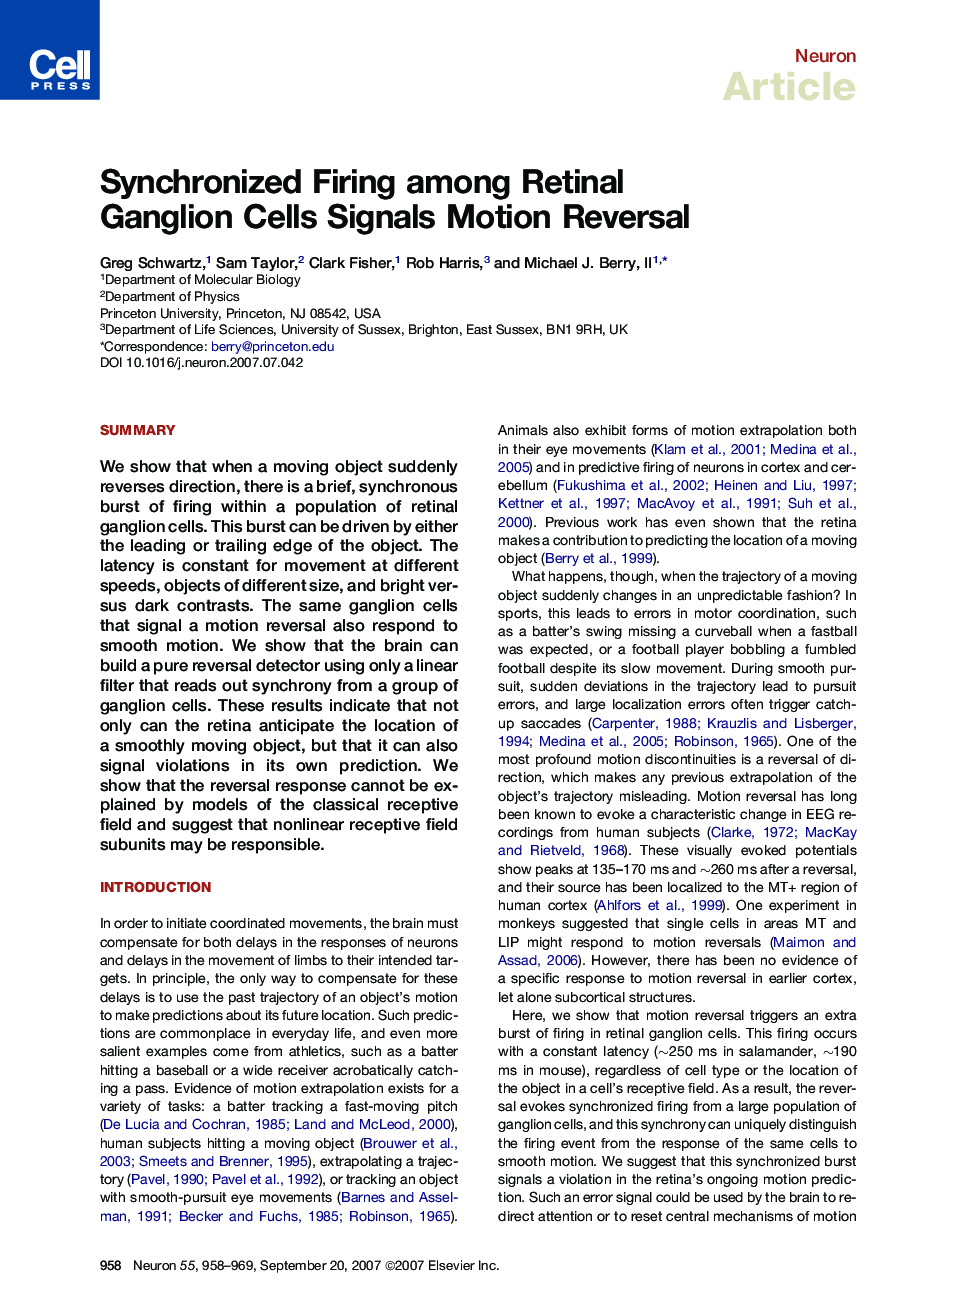 Synchronized Firing among Retinal Ganglion Cells Signals Motion Reversal